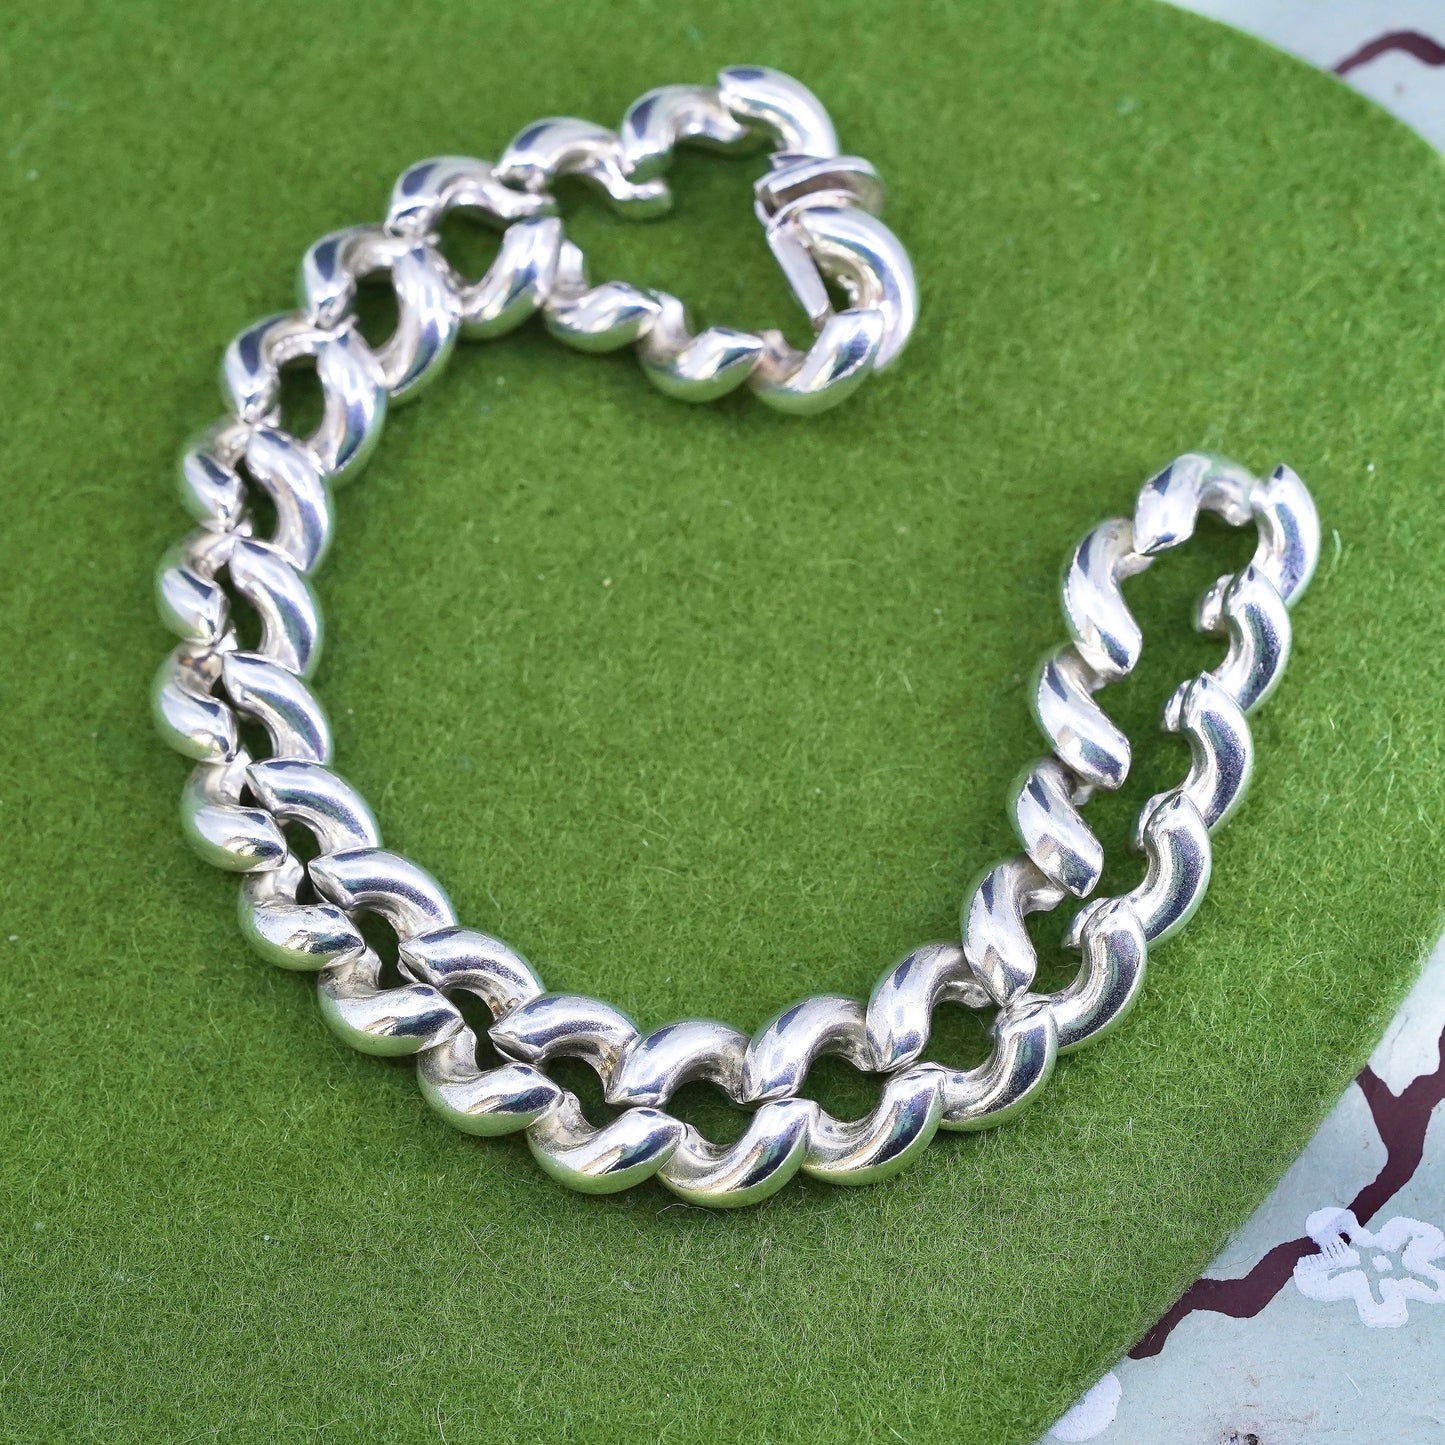 18", 10mm, Vintage Italian sterling silver necklace, 925 San Marco chain